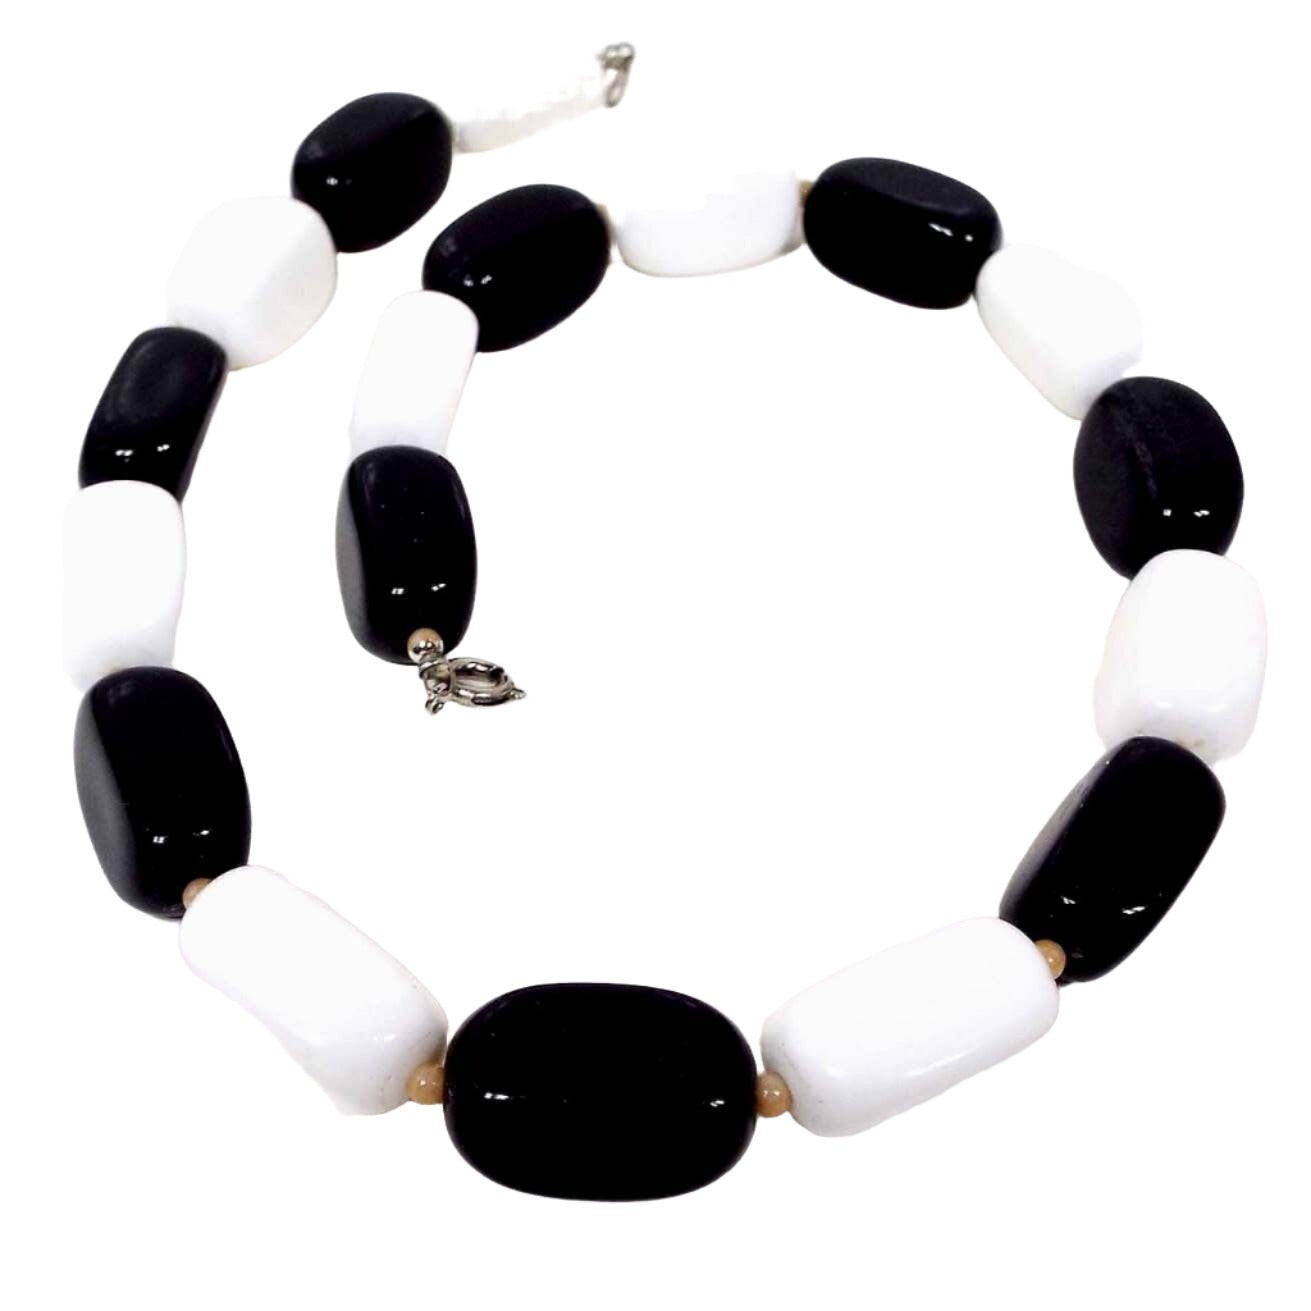 Front view of the retro vintage black and white lucite beaded necklace. The beads are rounded rectangle shape and alternate between black and white. There is a silver tone color spring ring clasp at the end and small light peach color seed beads in between the lucite beads.